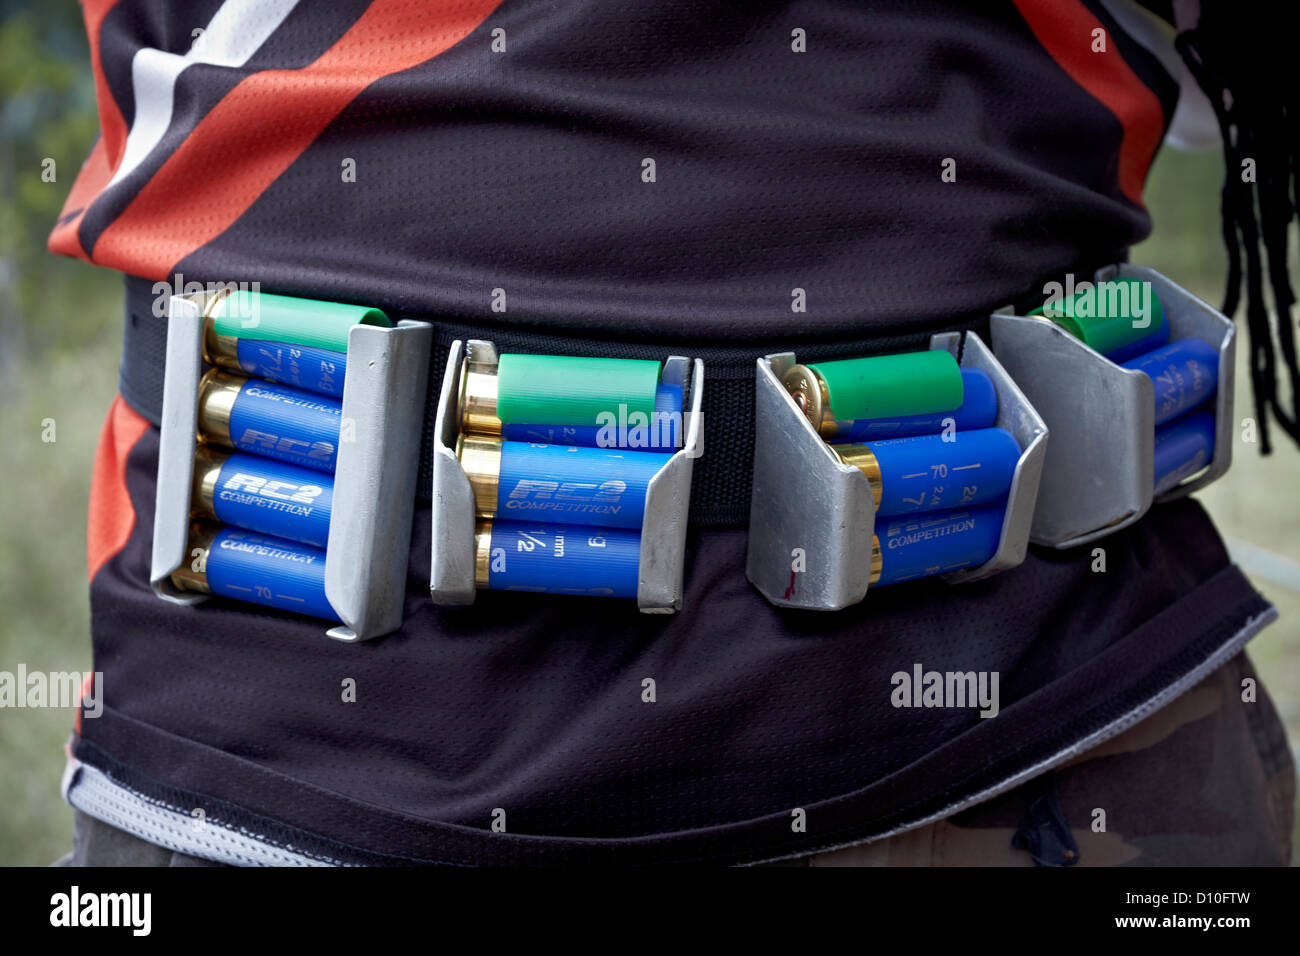 Ammunition belt and cartridges worn at a clay pigeon shoot Stock Photo